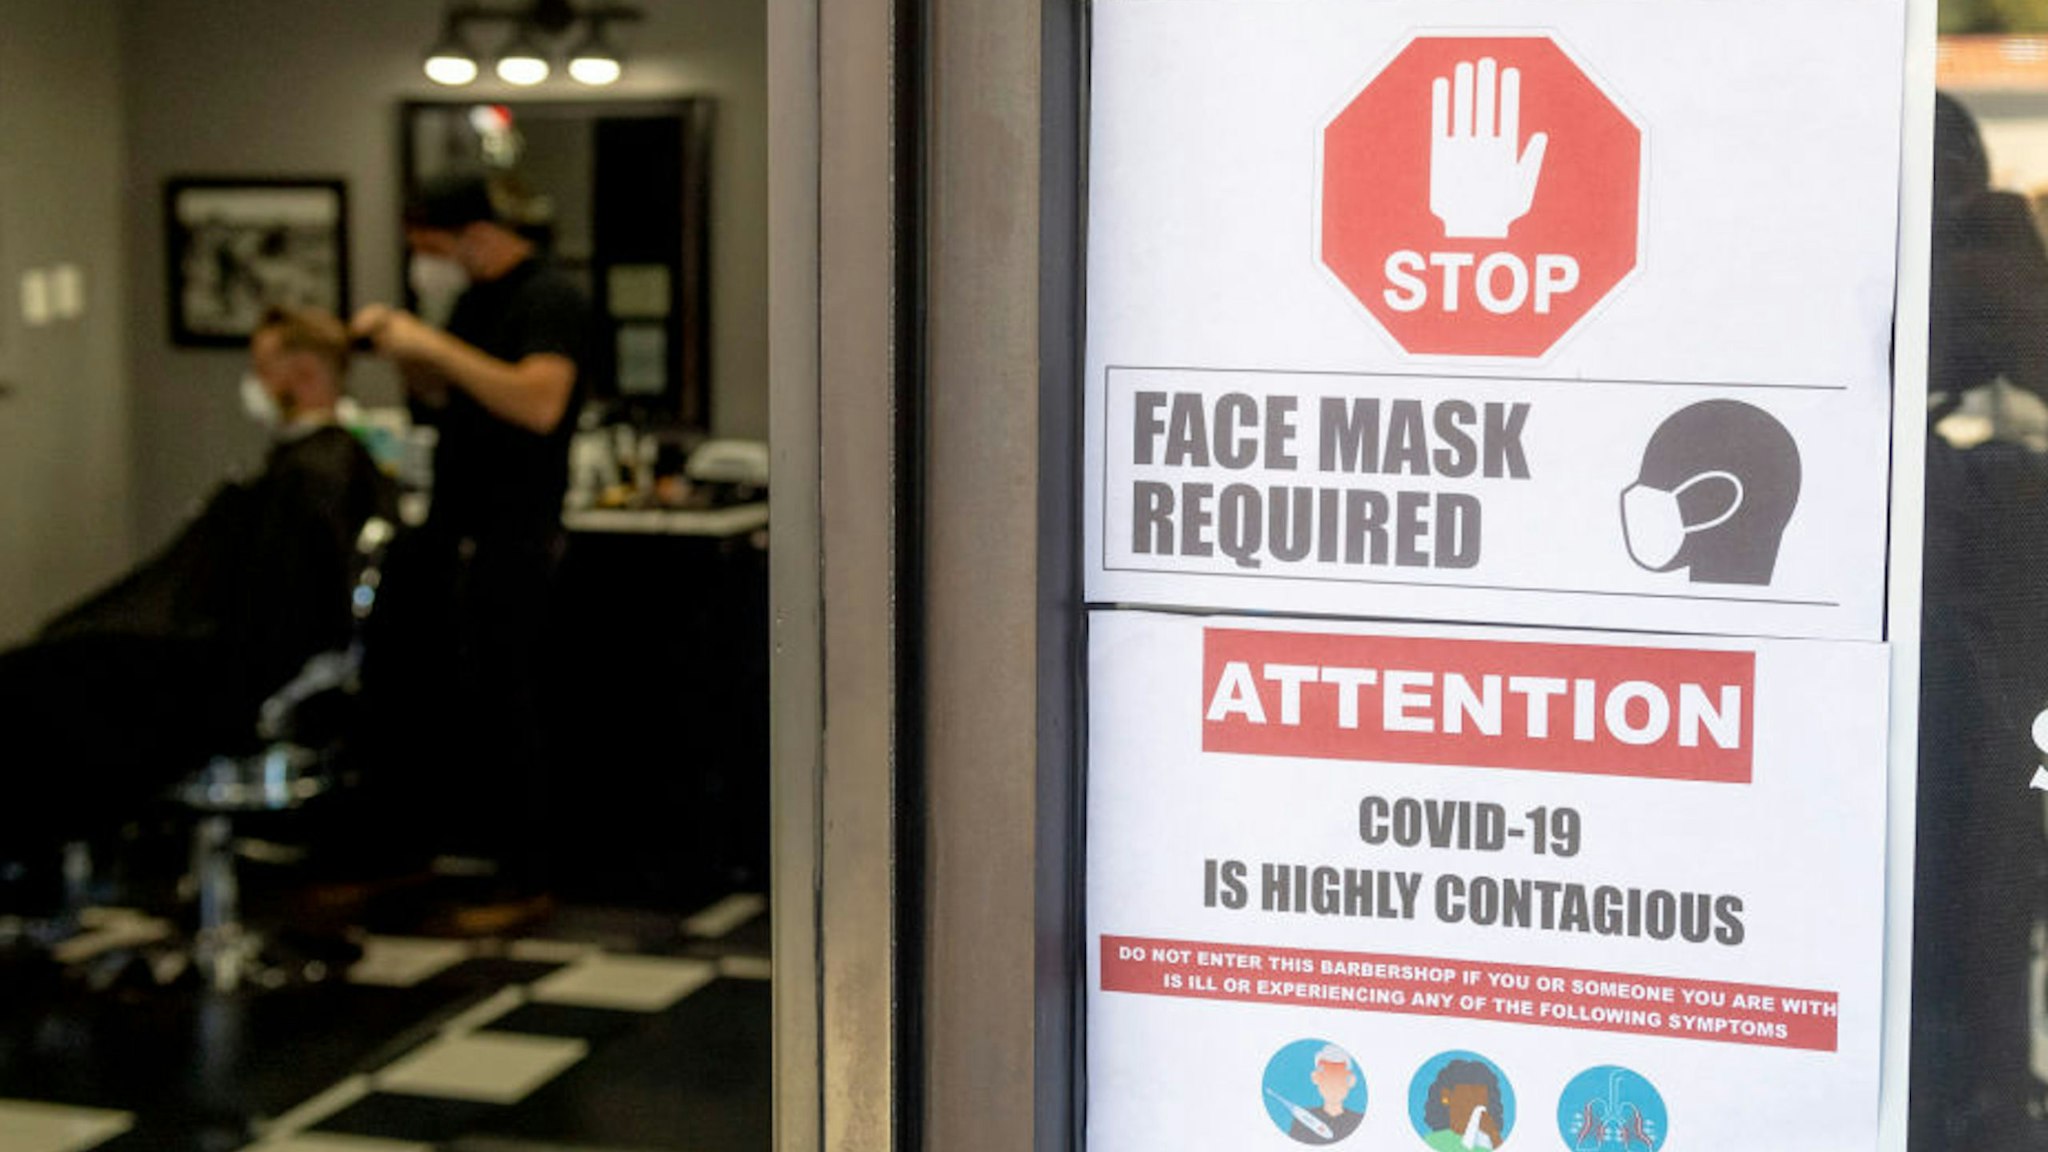 LAGUNA HILLS, CA - MAY 05: Customers maintain safety protocols at The BarberHood in Laguna Hills, CA, on Tuesday, May 5, 2020. The shop is one of the first to re-open and defy the state"u2019s stay-at-home order during the COVID-19 (coronavirus) lockdown.